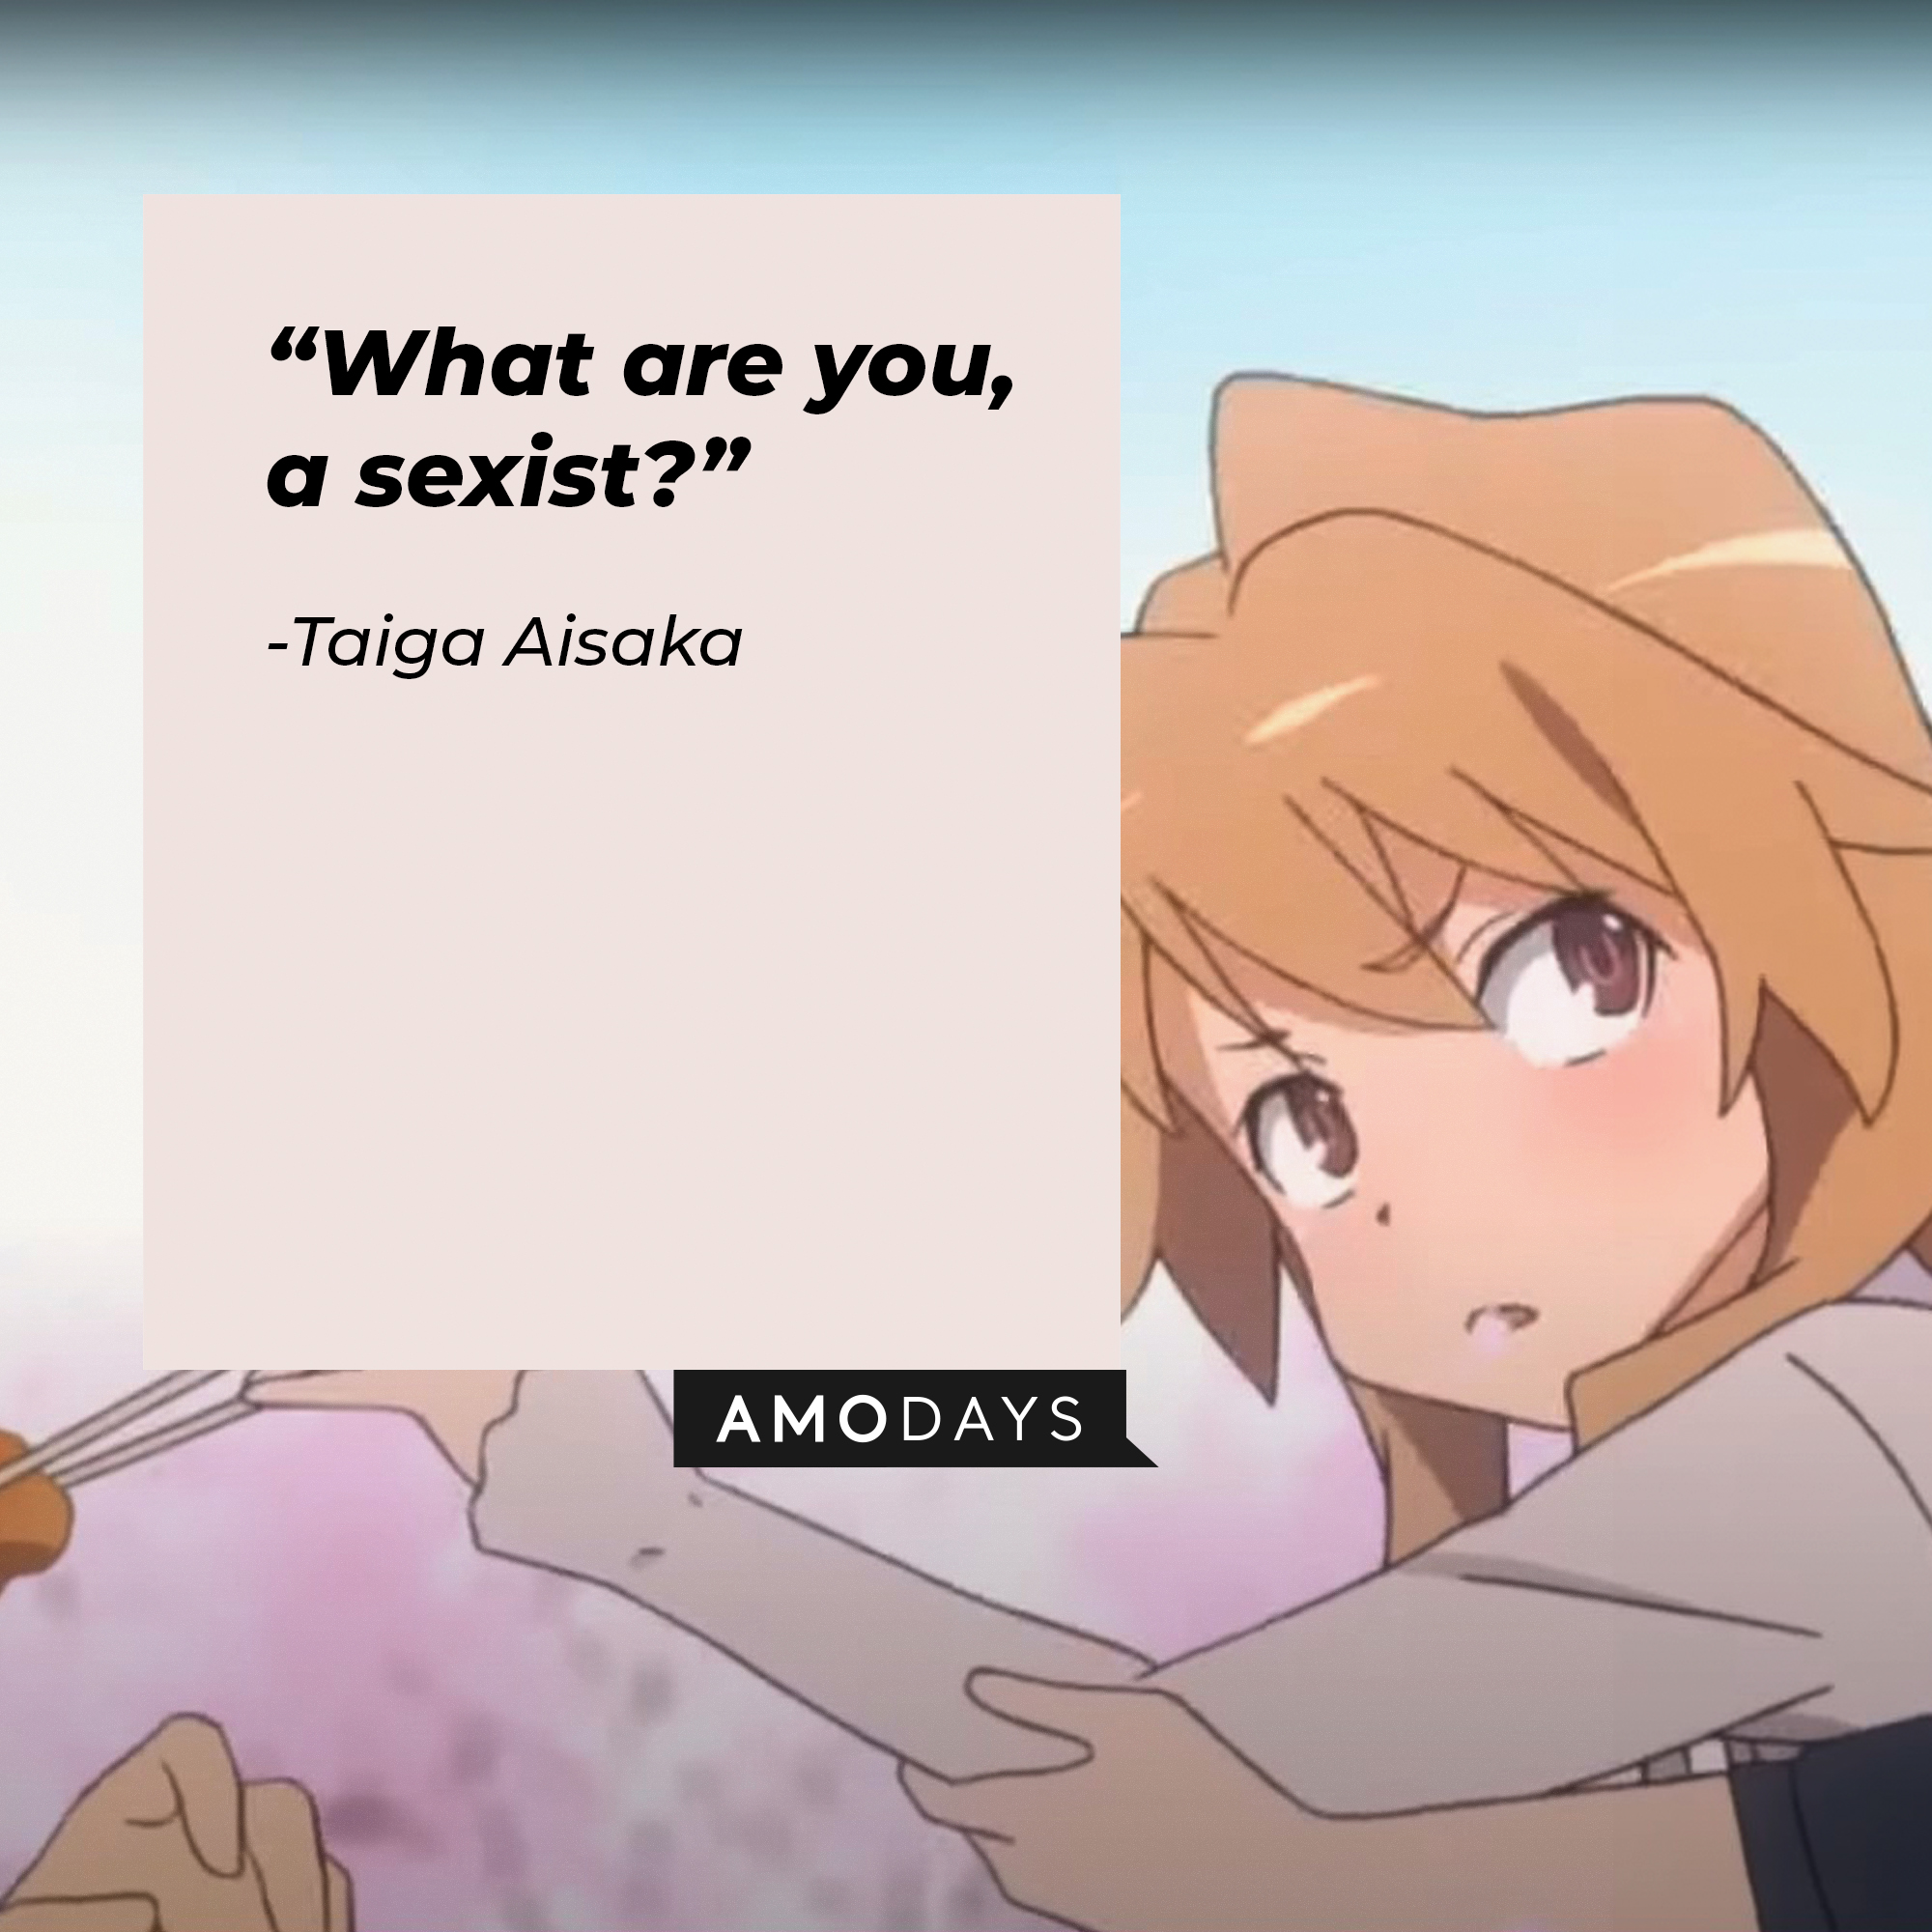 A picture of the animated character Taiga Aisaka with a quote by her: “What are you, a sexist?” | Image: facebook.com/toradoraoff